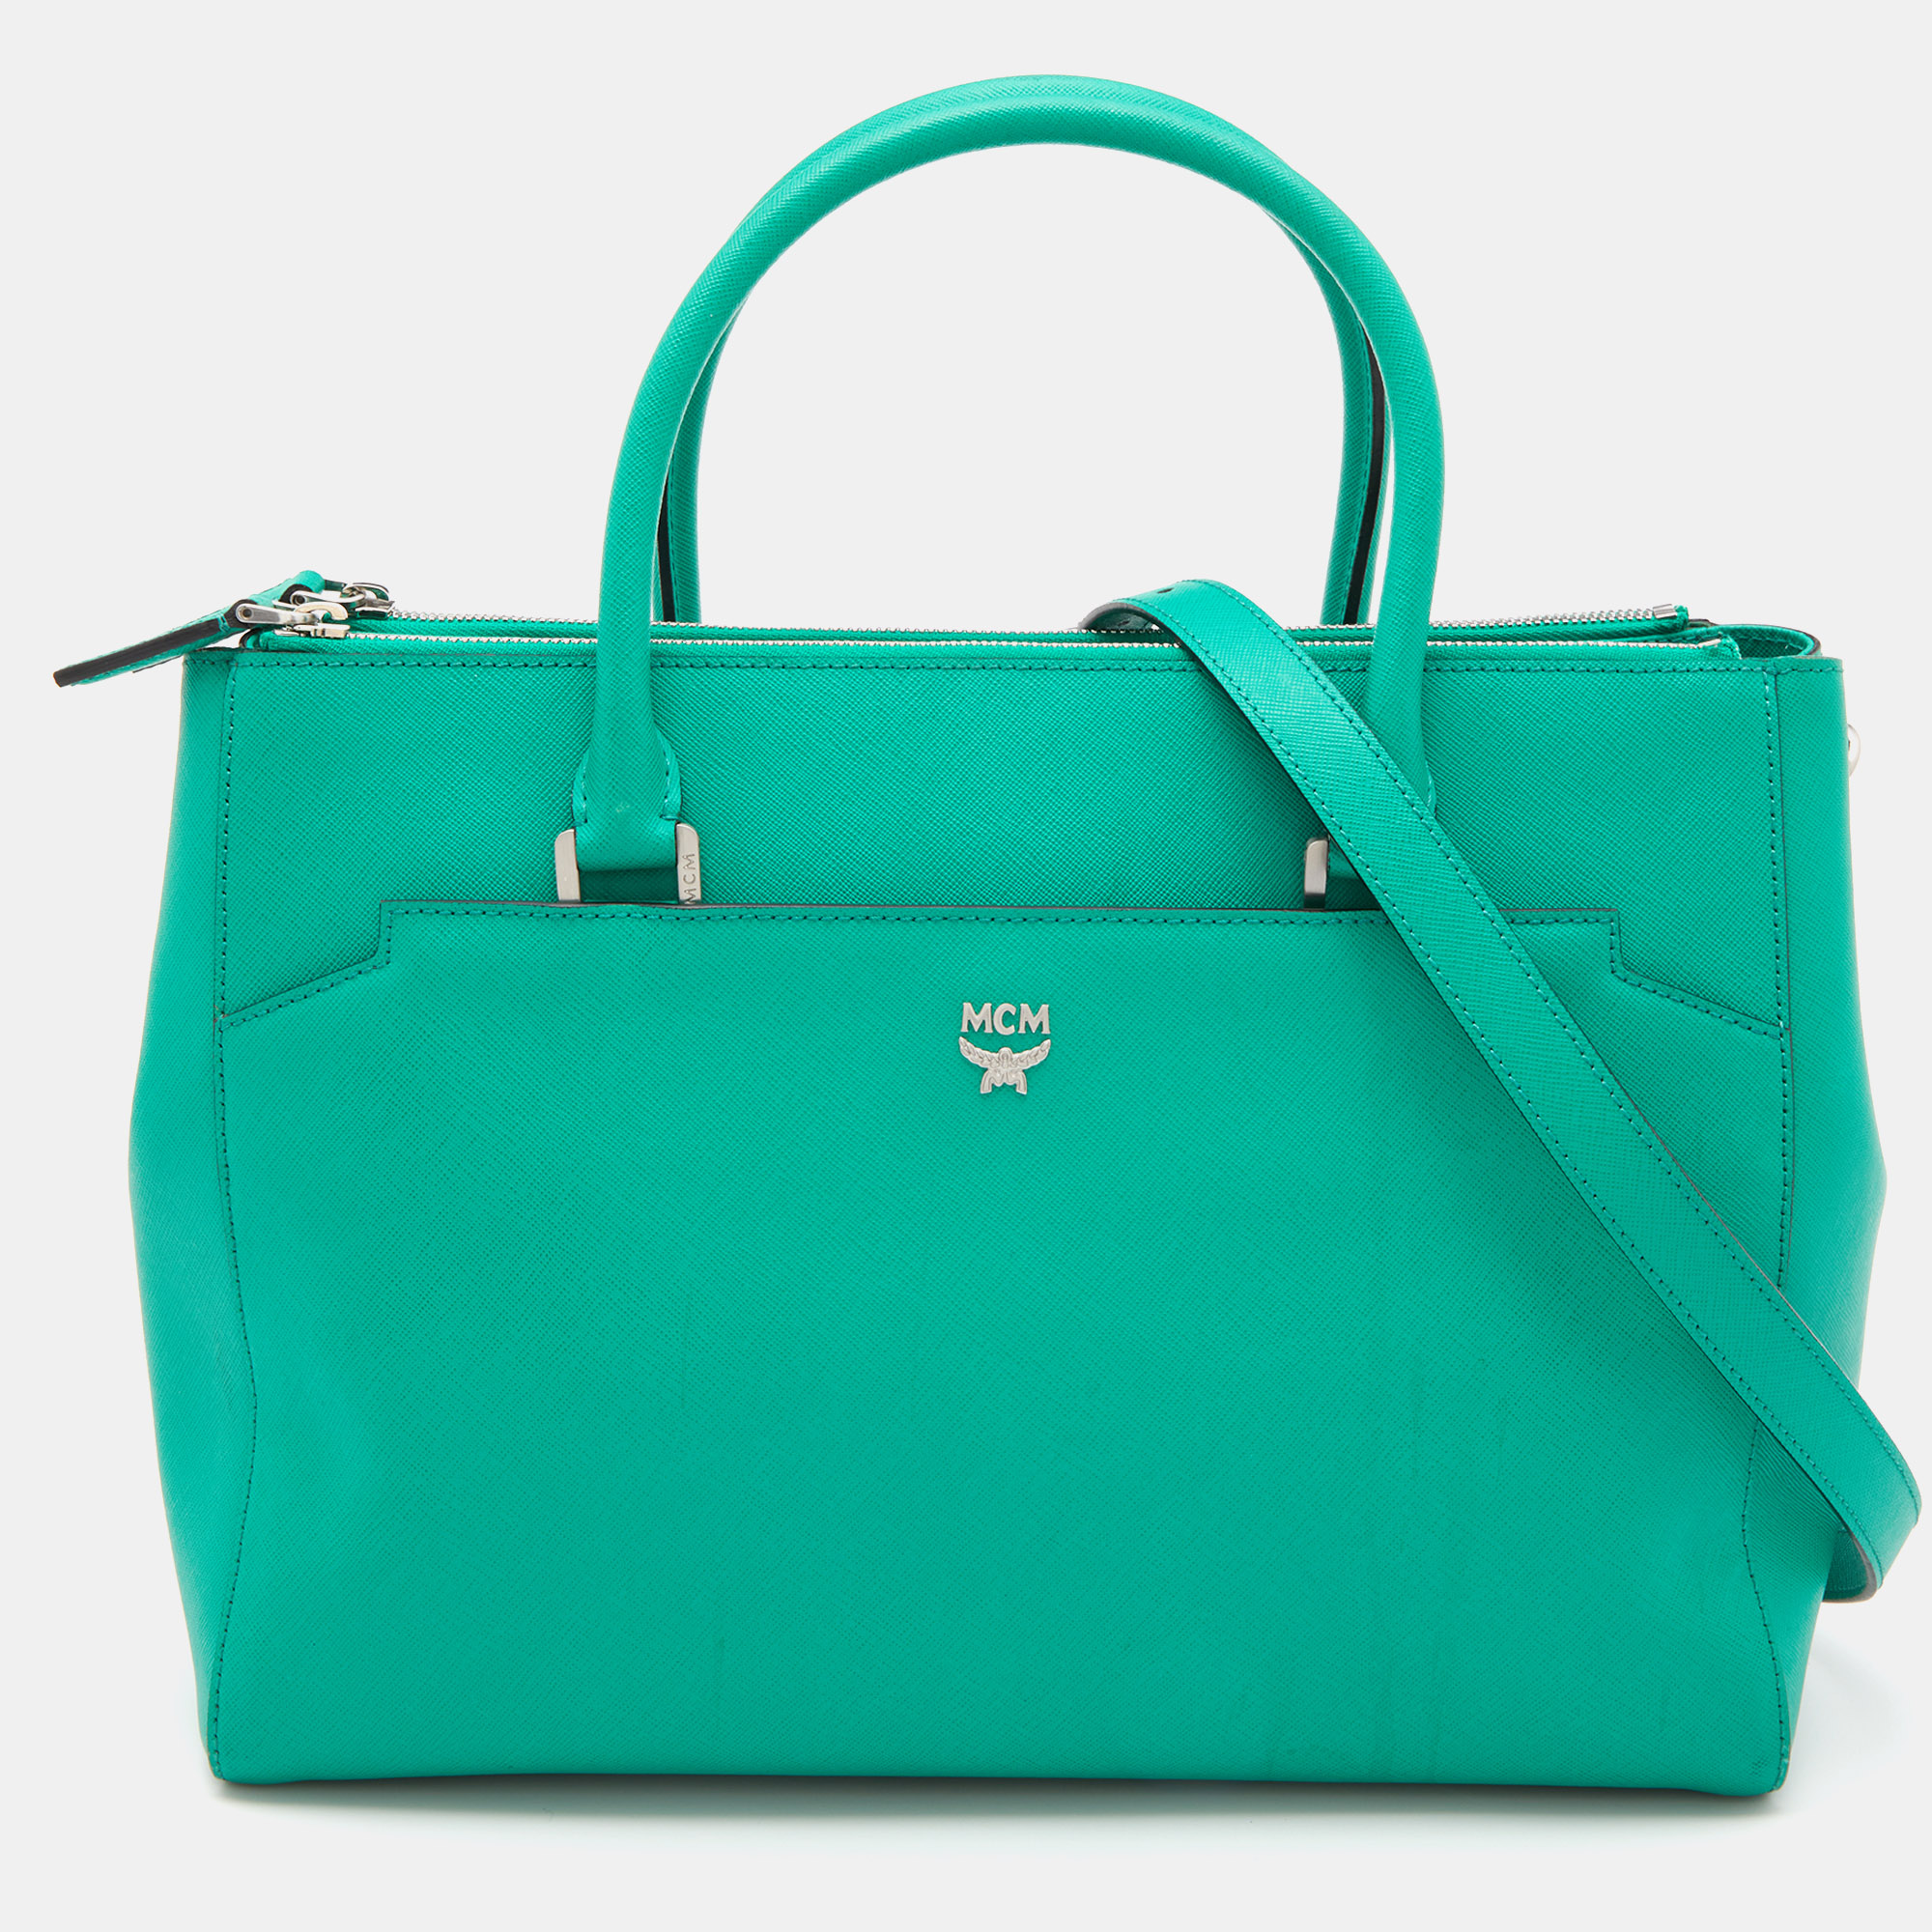 Mcm green leather convertible tote